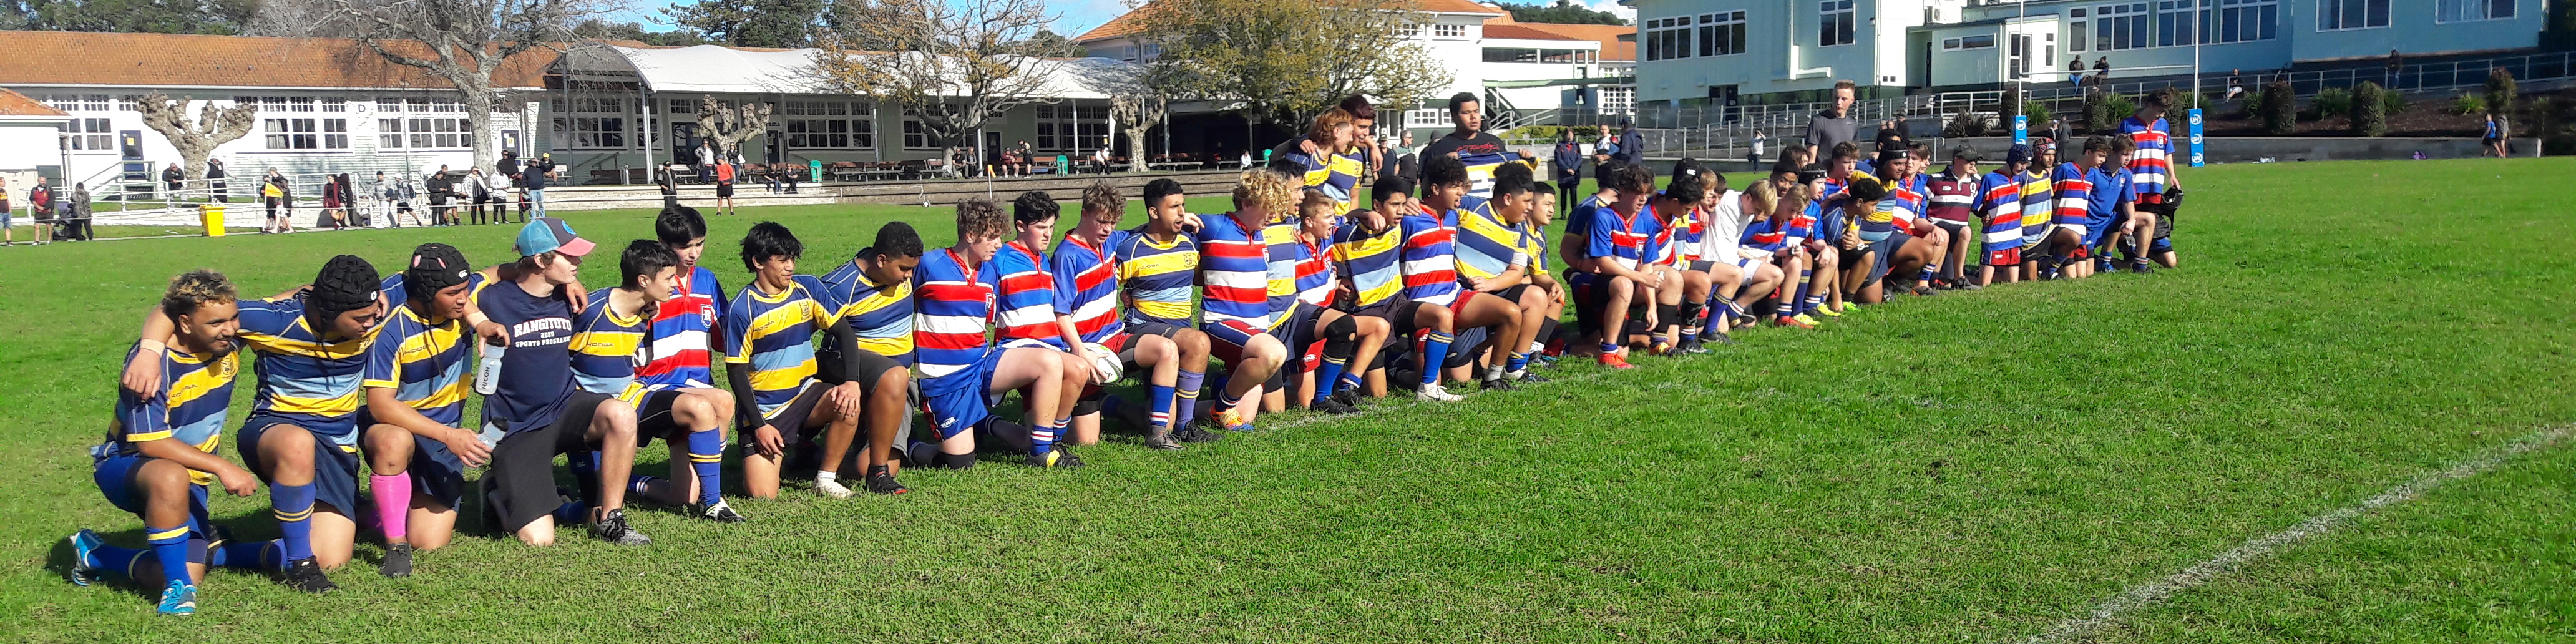 rugby 1st XV june 2020